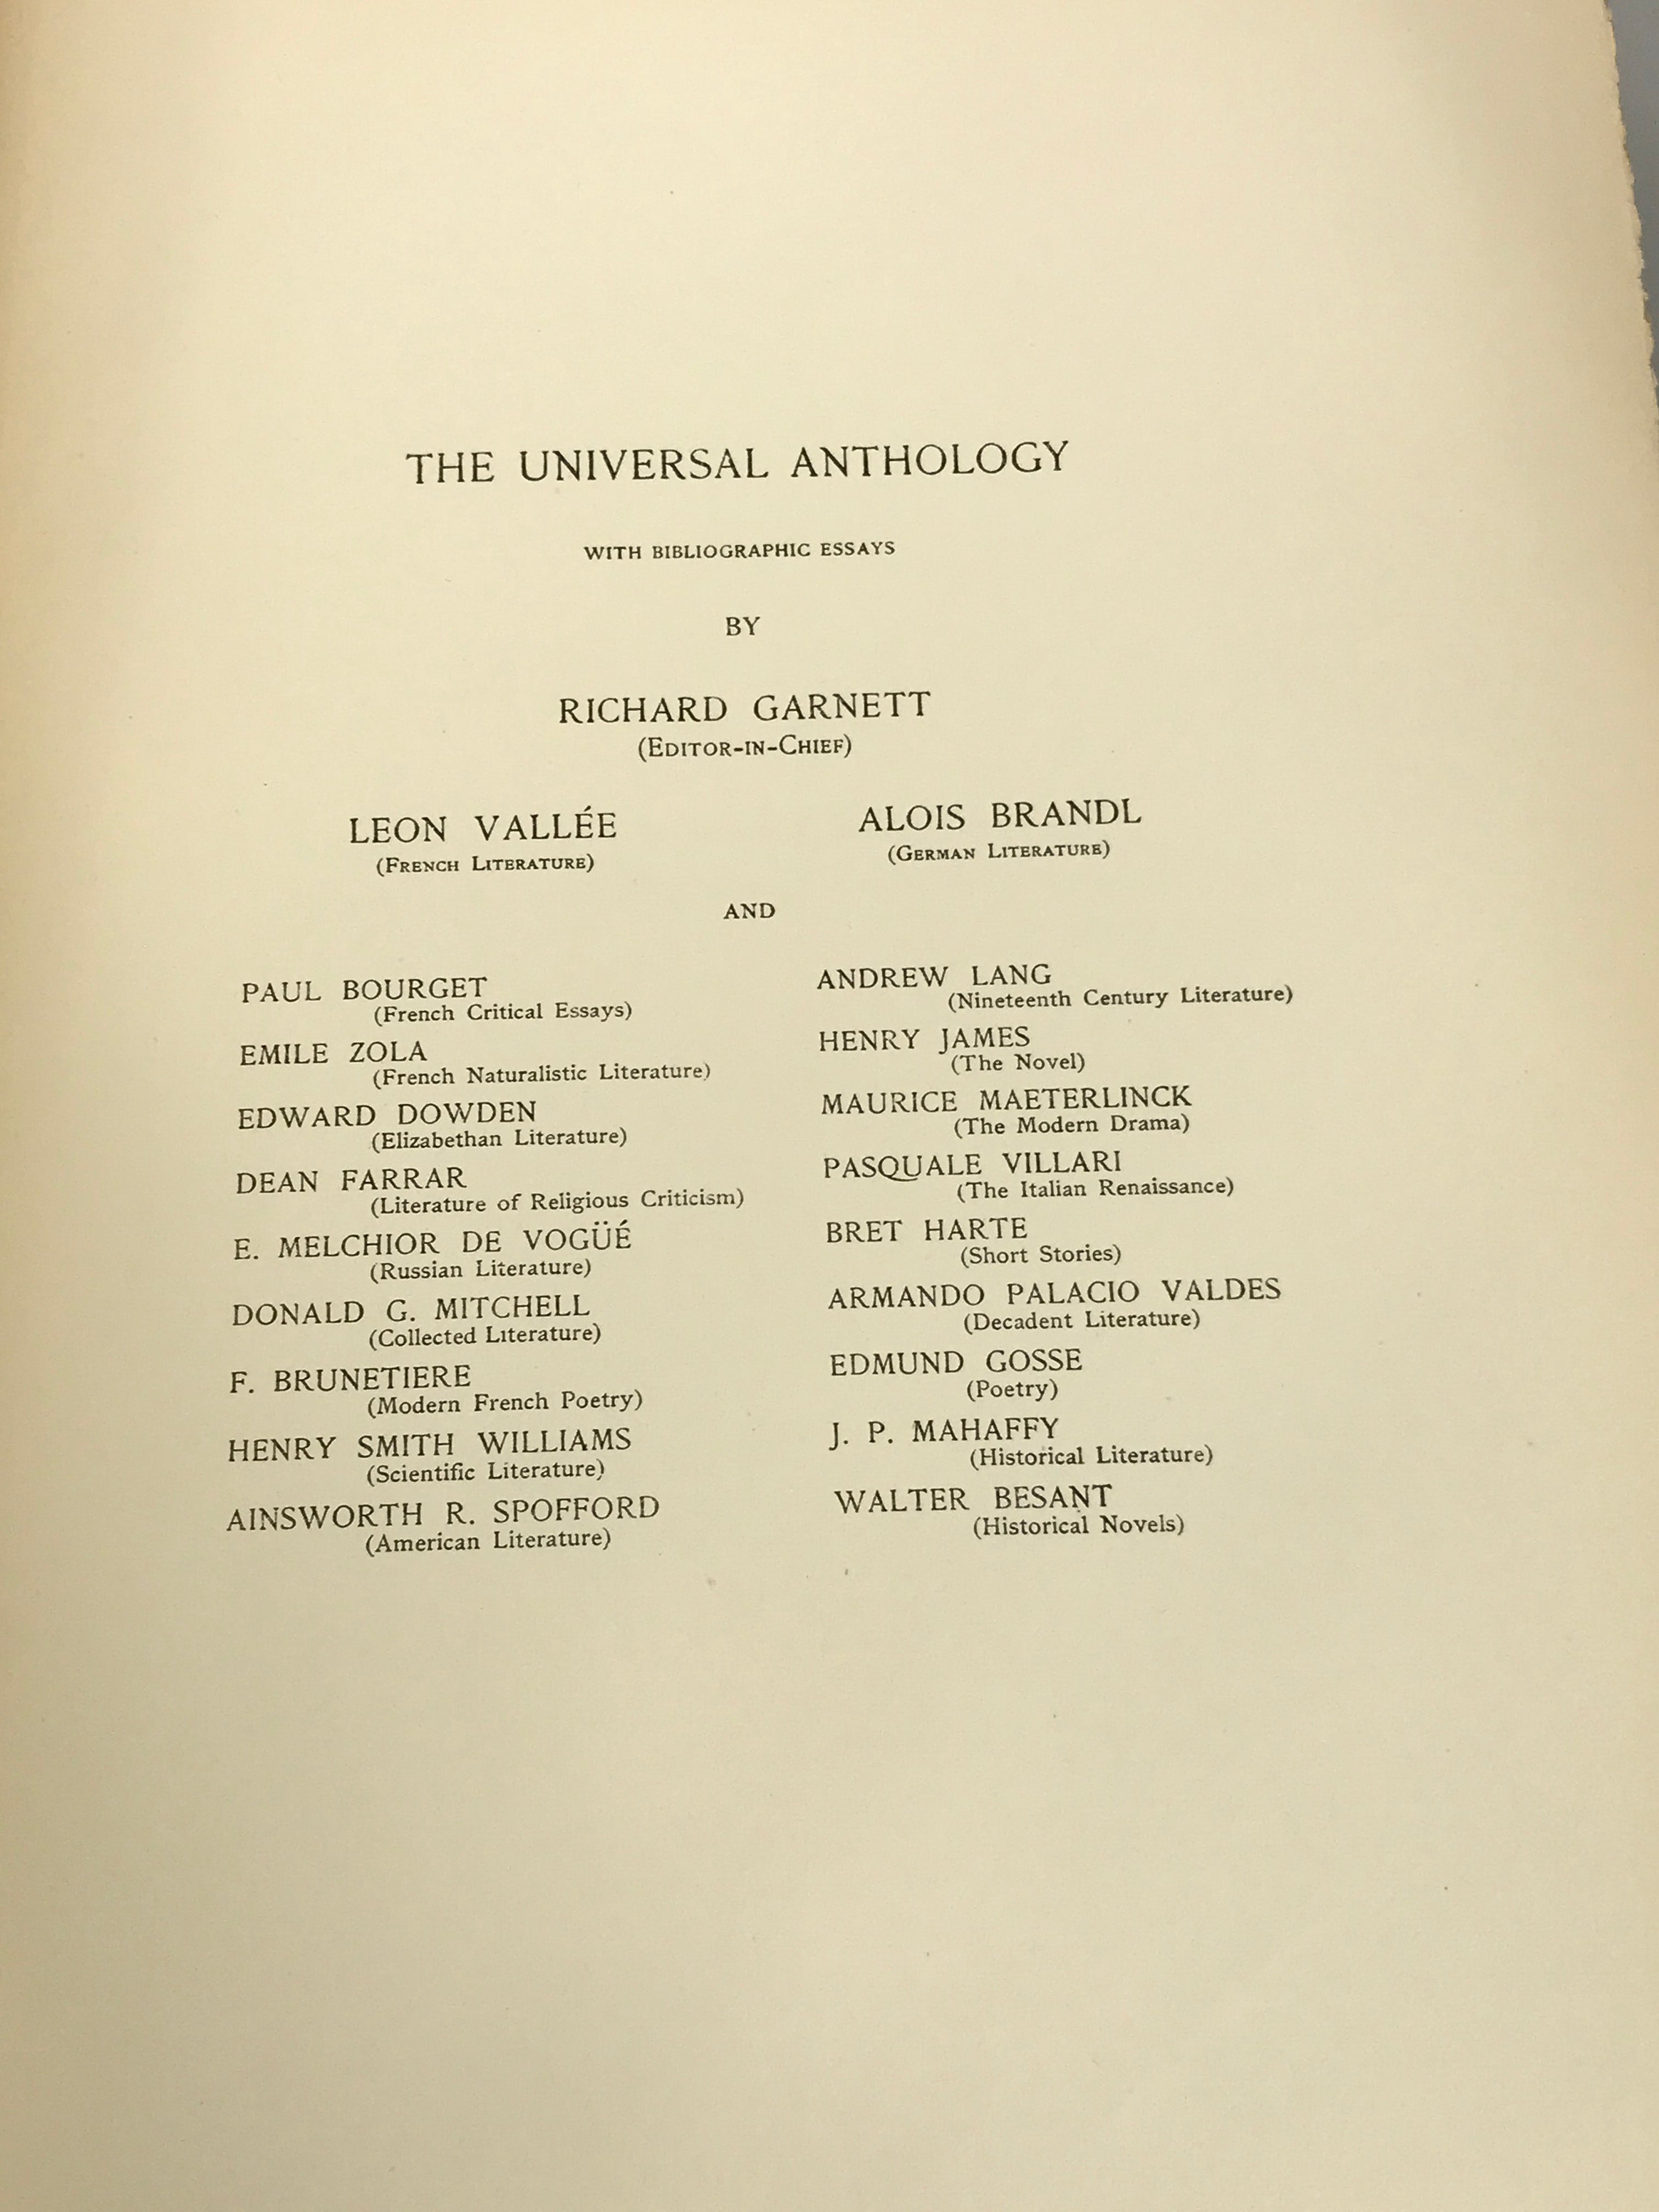 The Universal Anthology Edition Nationale Vols 1-33 253/1000 1889